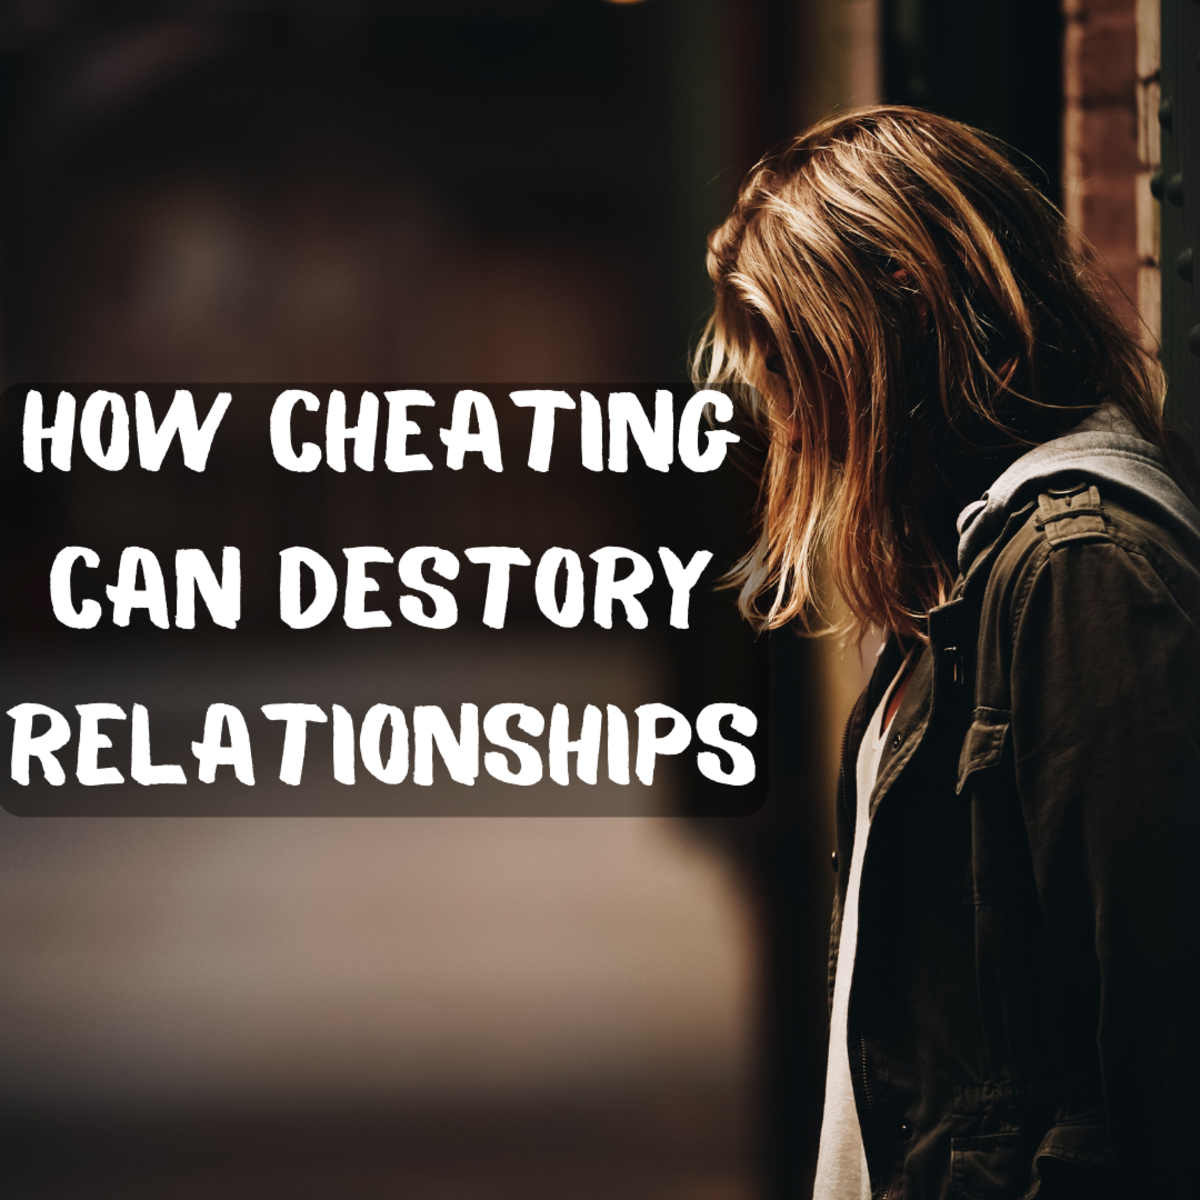 Read on to learn about how cheating can damage and even ruin relationships.